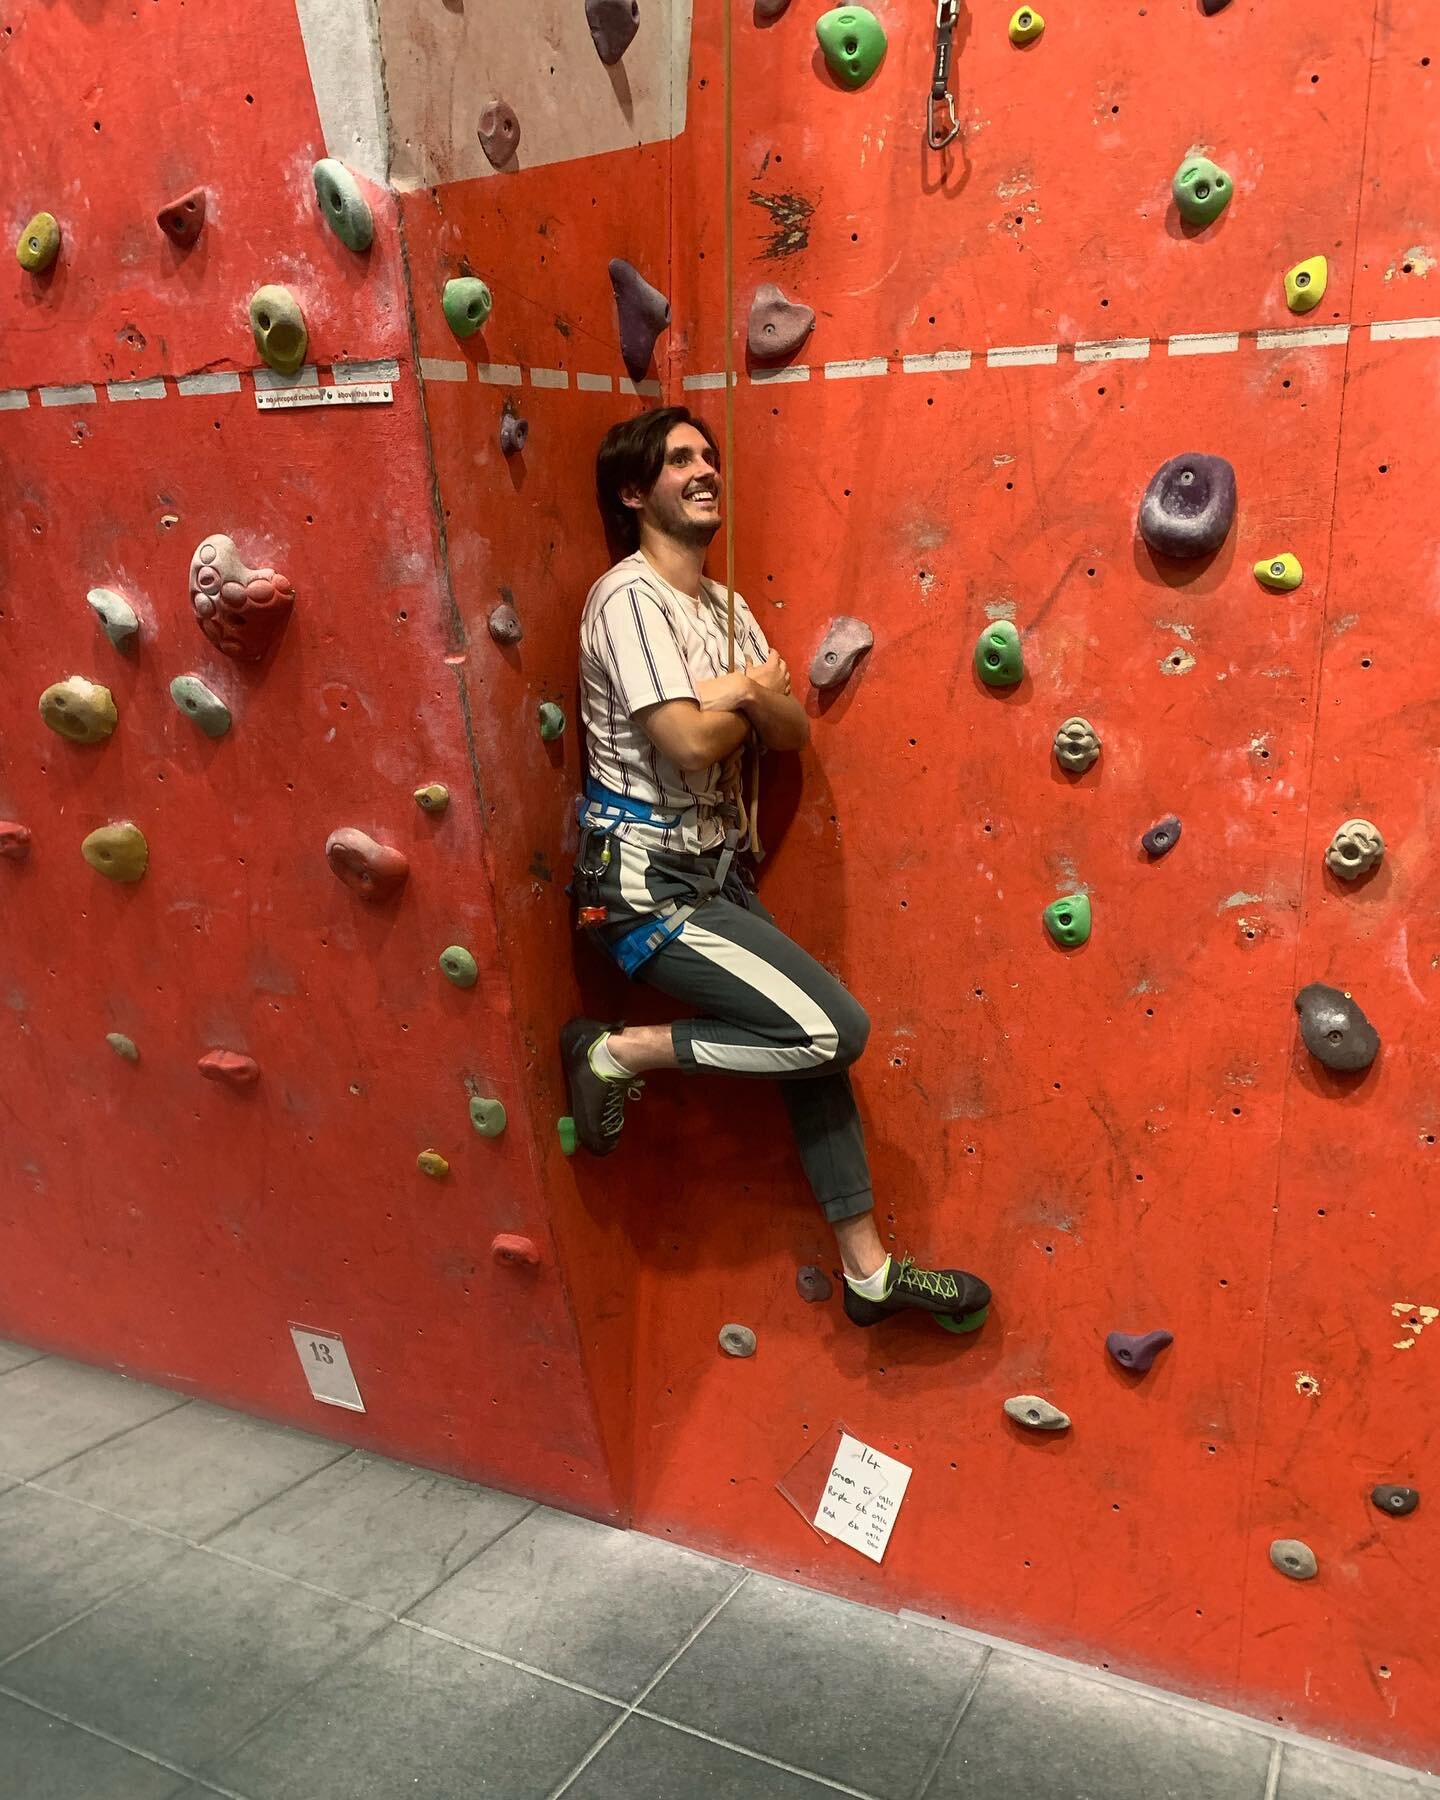 Working on climbing strategies tonight, mostly thinking about rests..

#climbing #climbinglife #rockclimbing #climbing_pictures_of_instagram #happy #insta_ireland #insta_ni #loveireland #discoverireland #discoverni #belfast #belfastcity #nohandrest